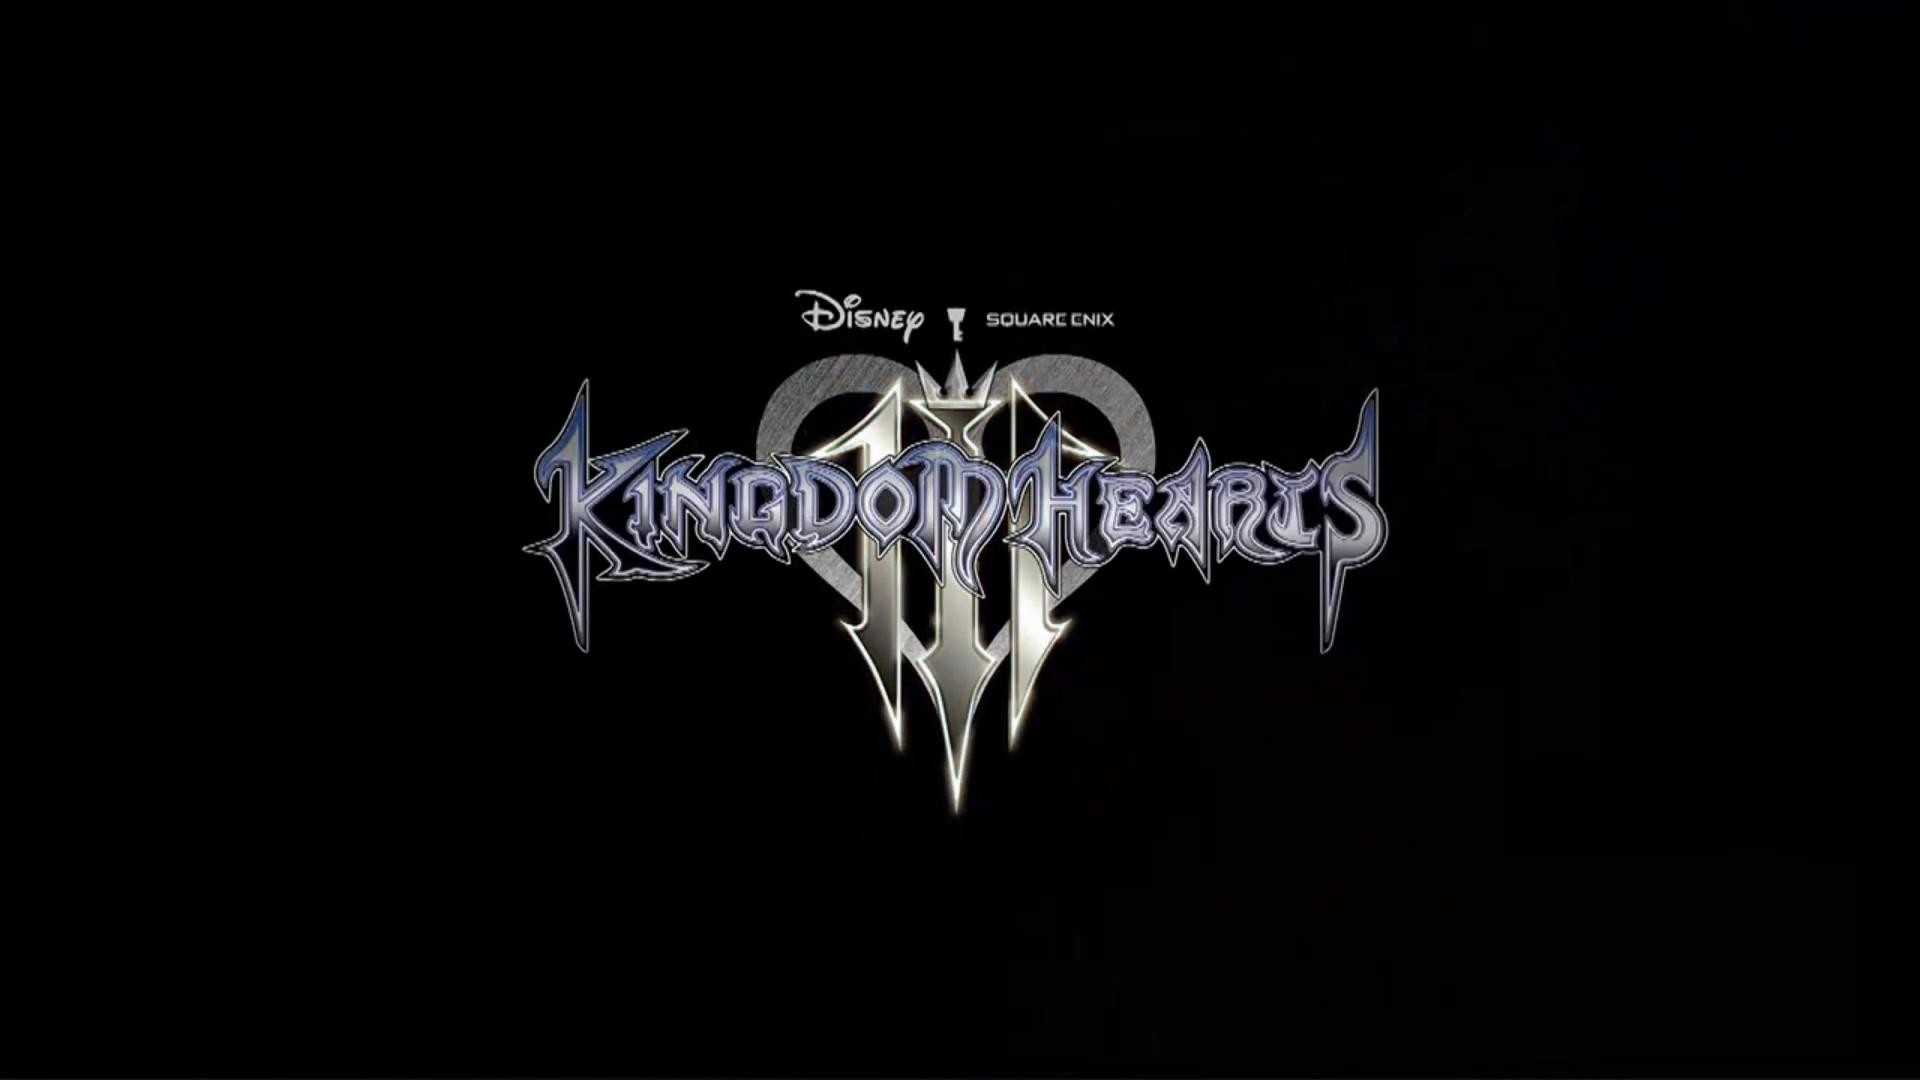 1920x1080 Wallpapers For > Kingdom Hearts 3 Iphone Wallpaper